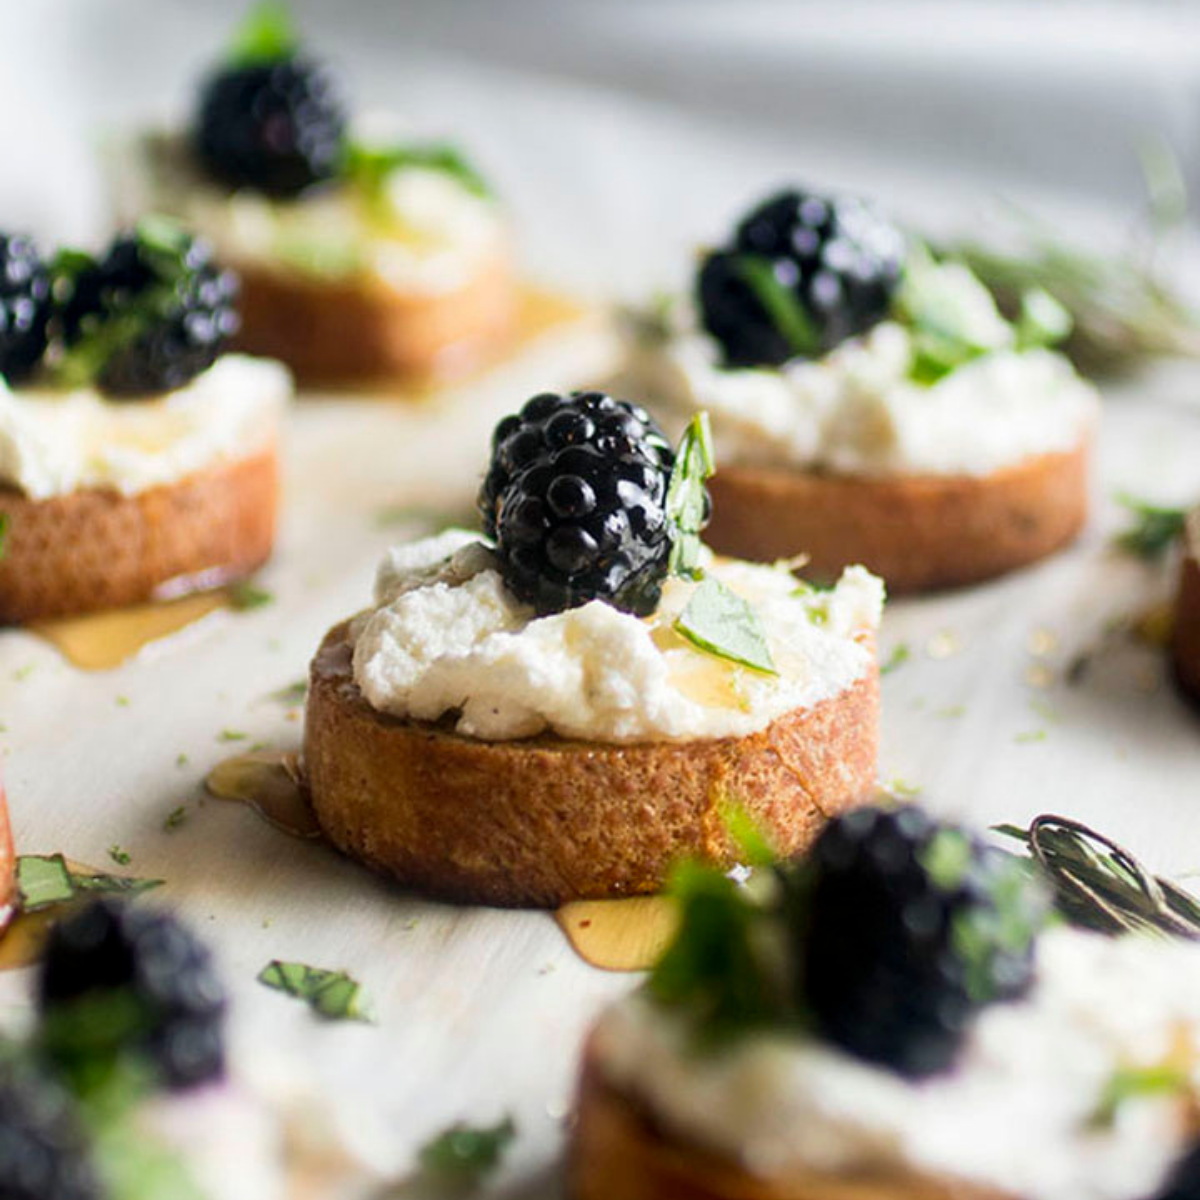 Tray of crostini topped with goat cheese and fresh blackberries.